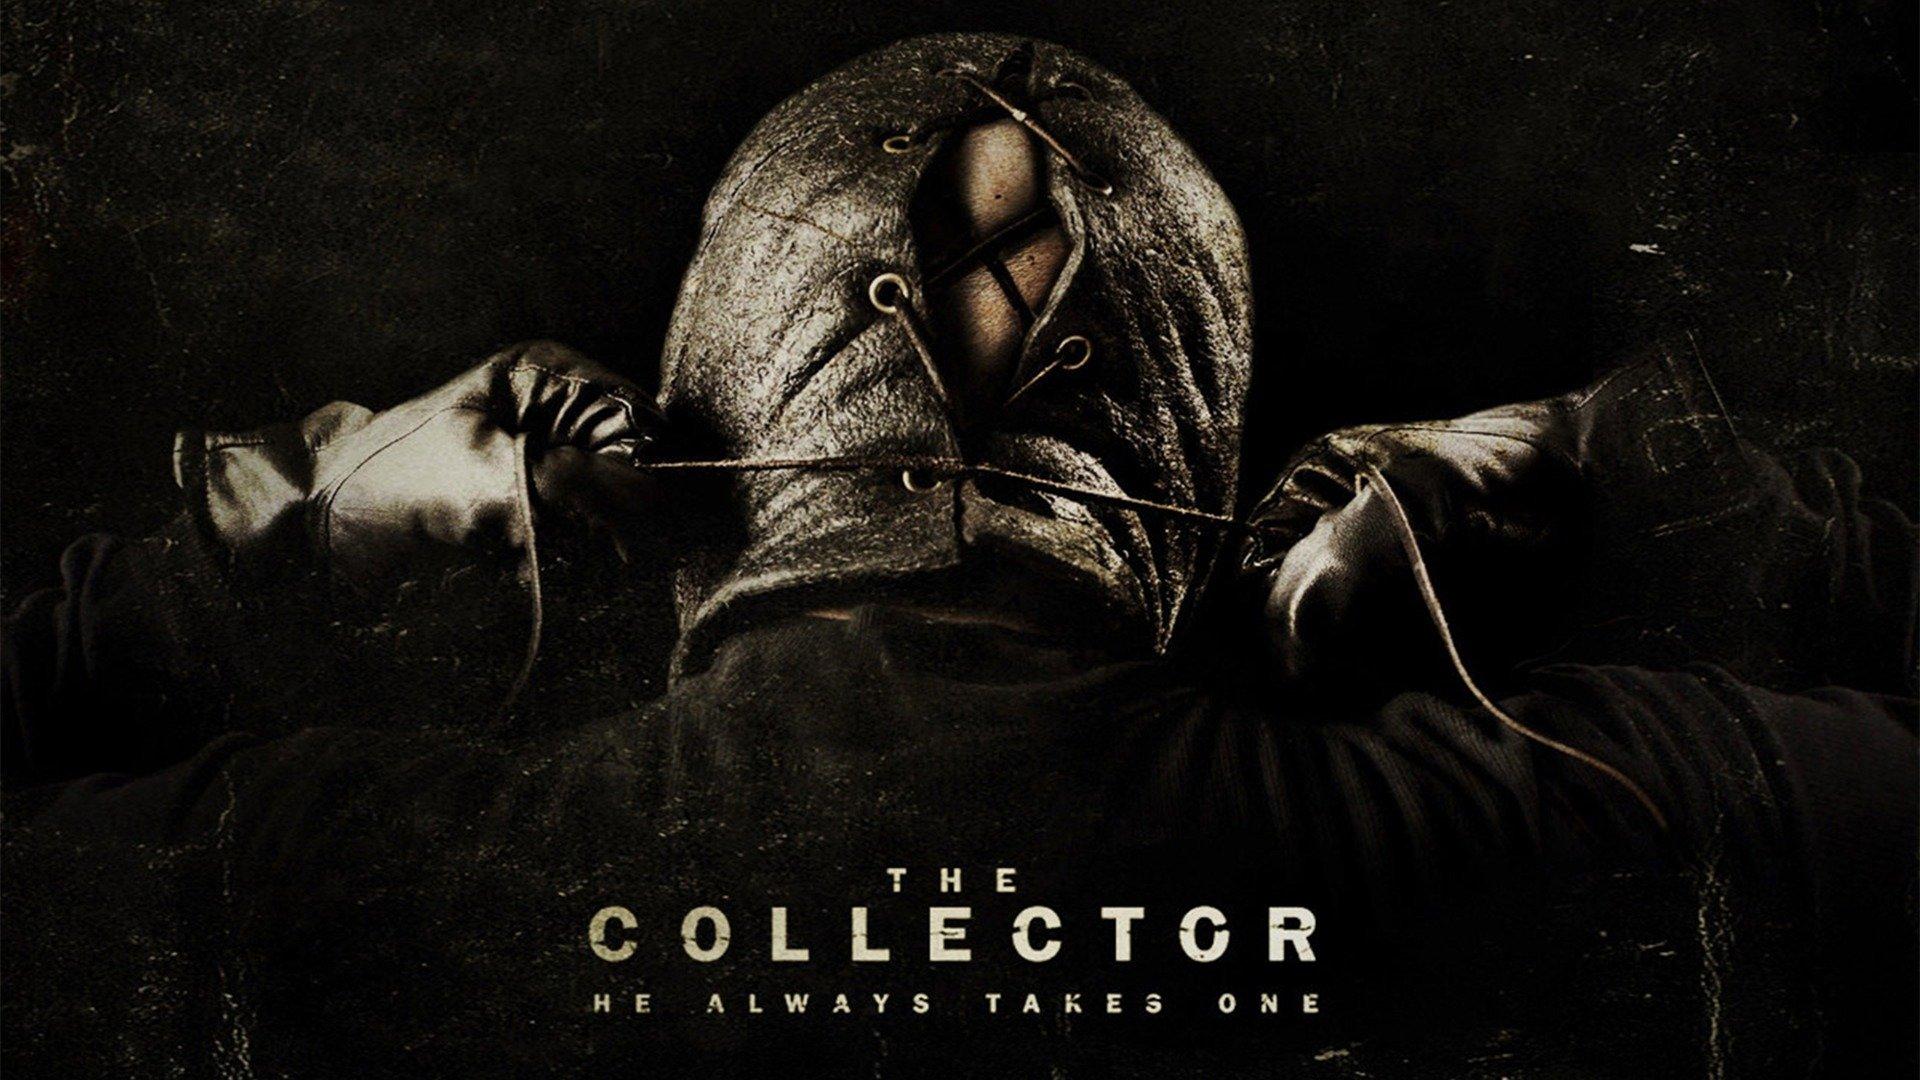 Watch The Collector Streaming Online on Philo (Free Trial)